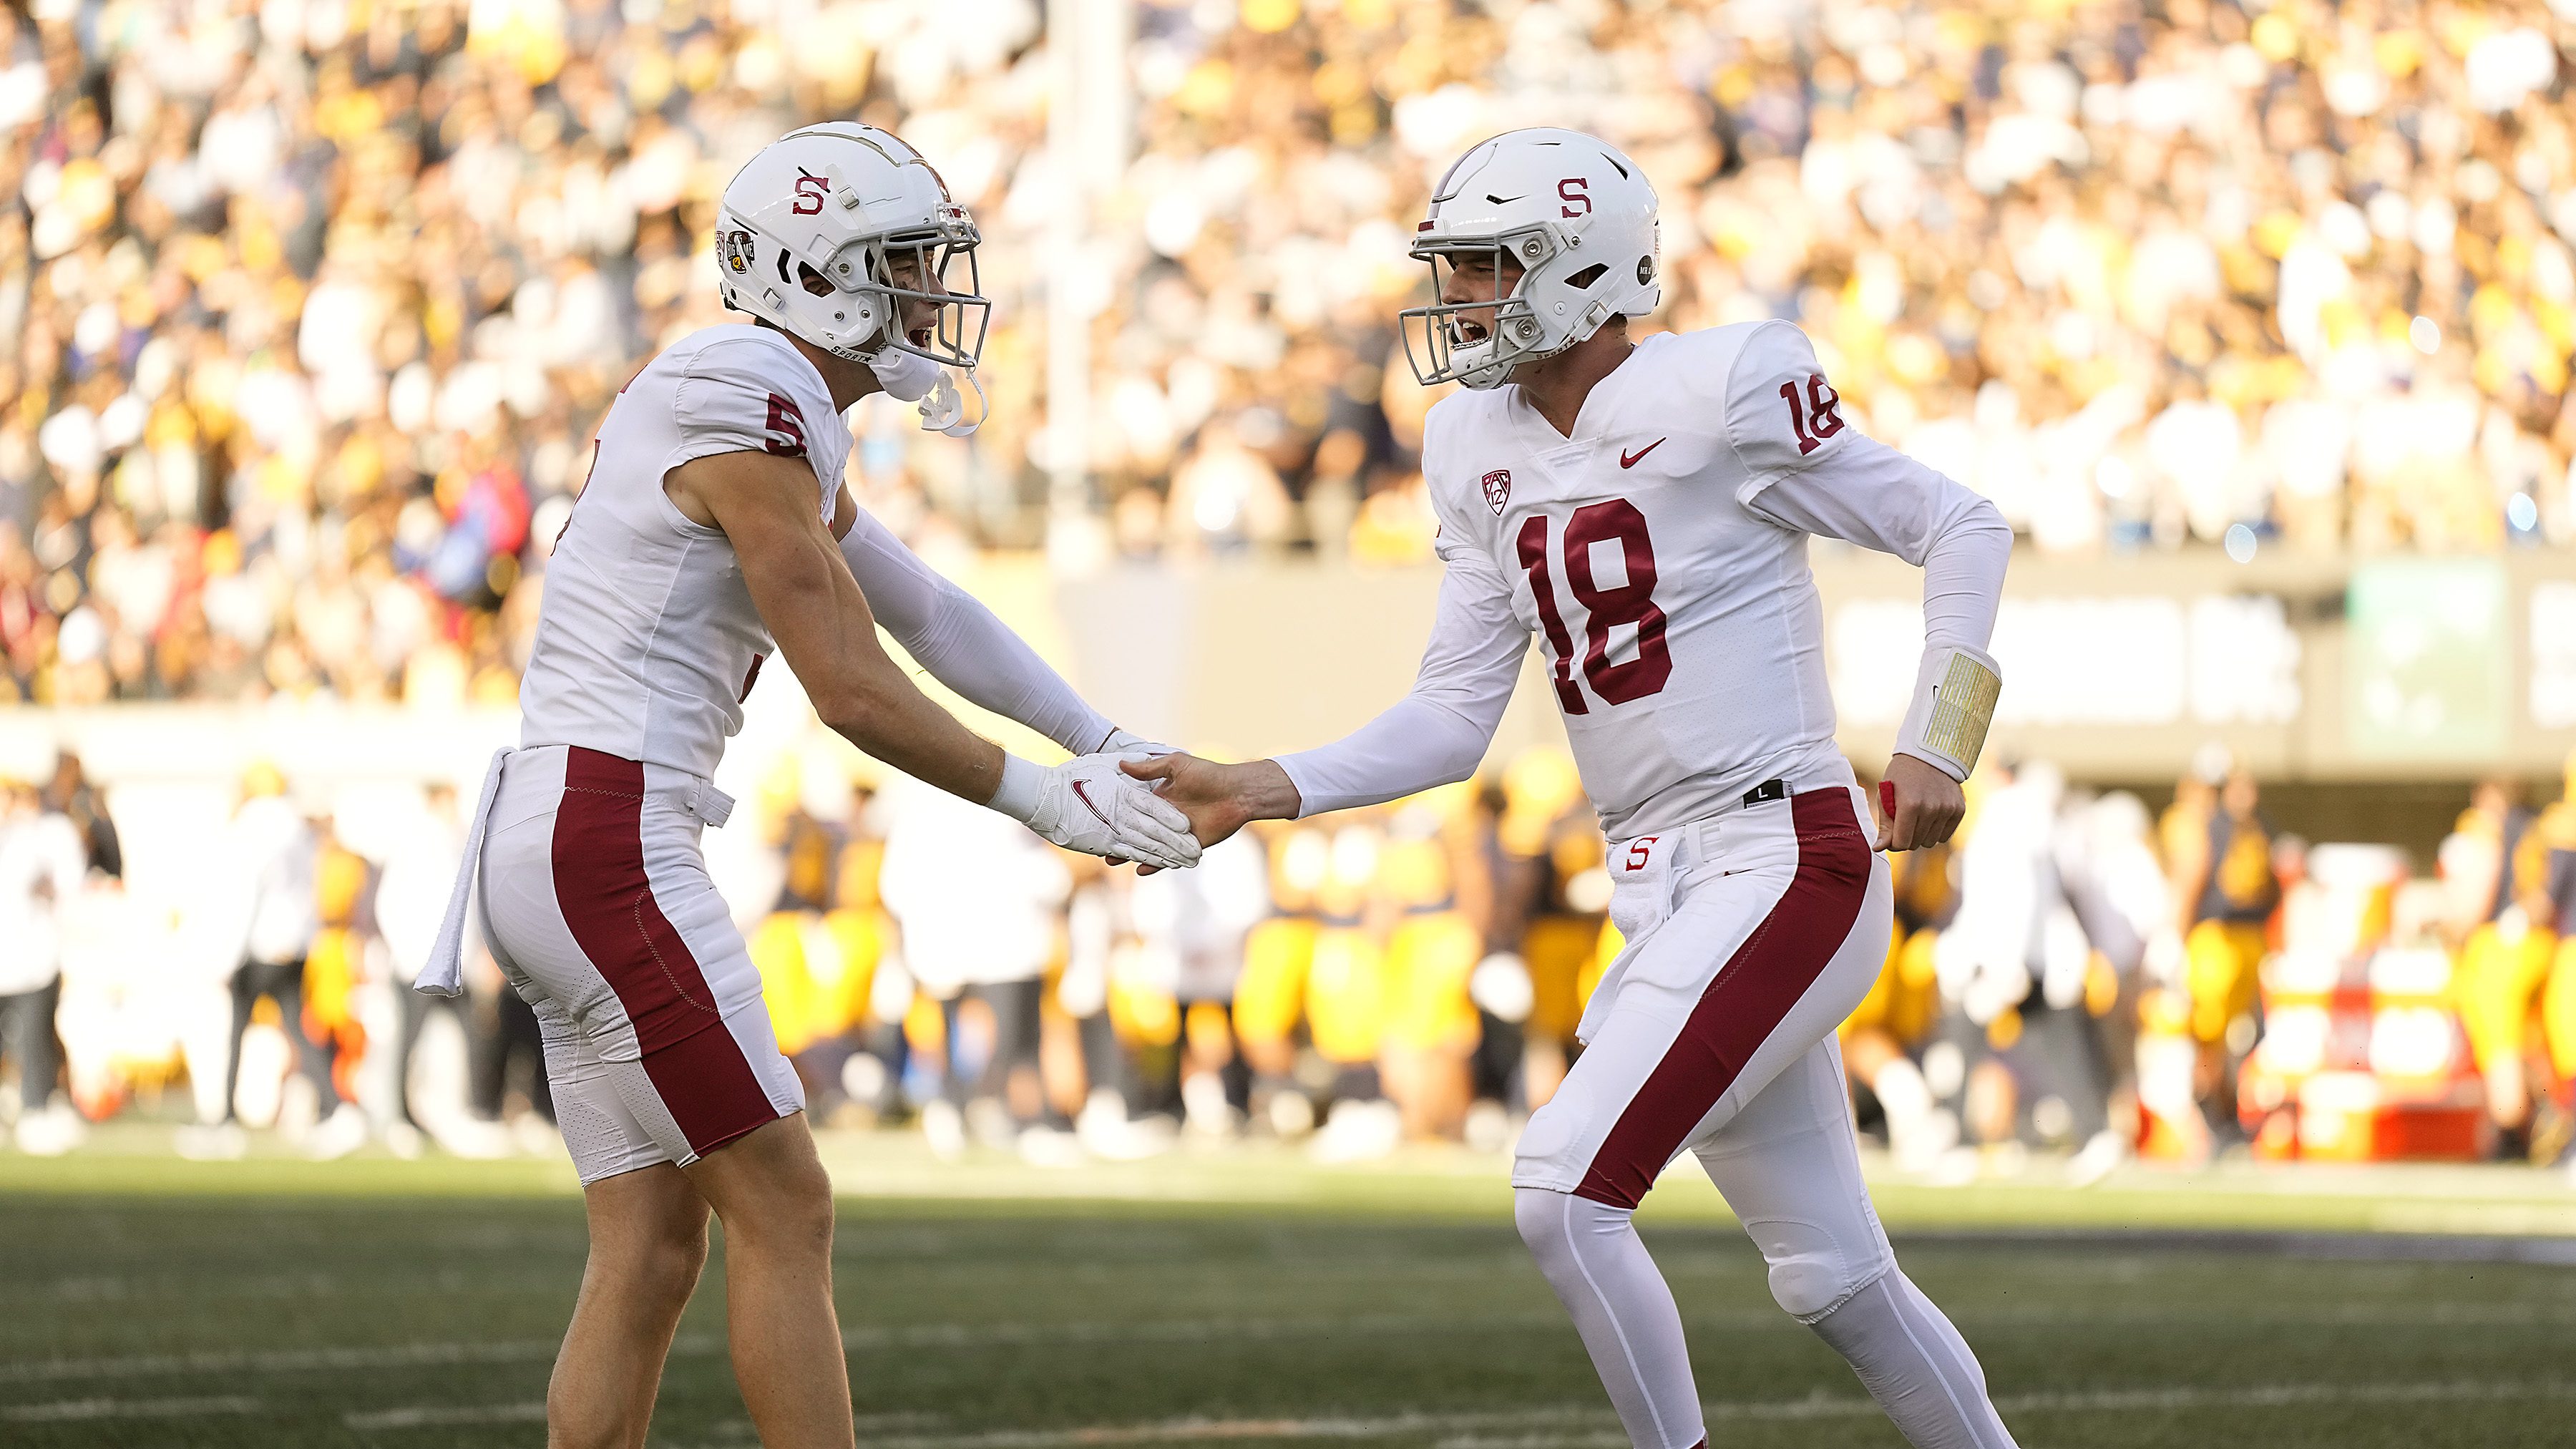 Stanford Football: Tanner McKee goes to Philadelphia Eagles in 6th